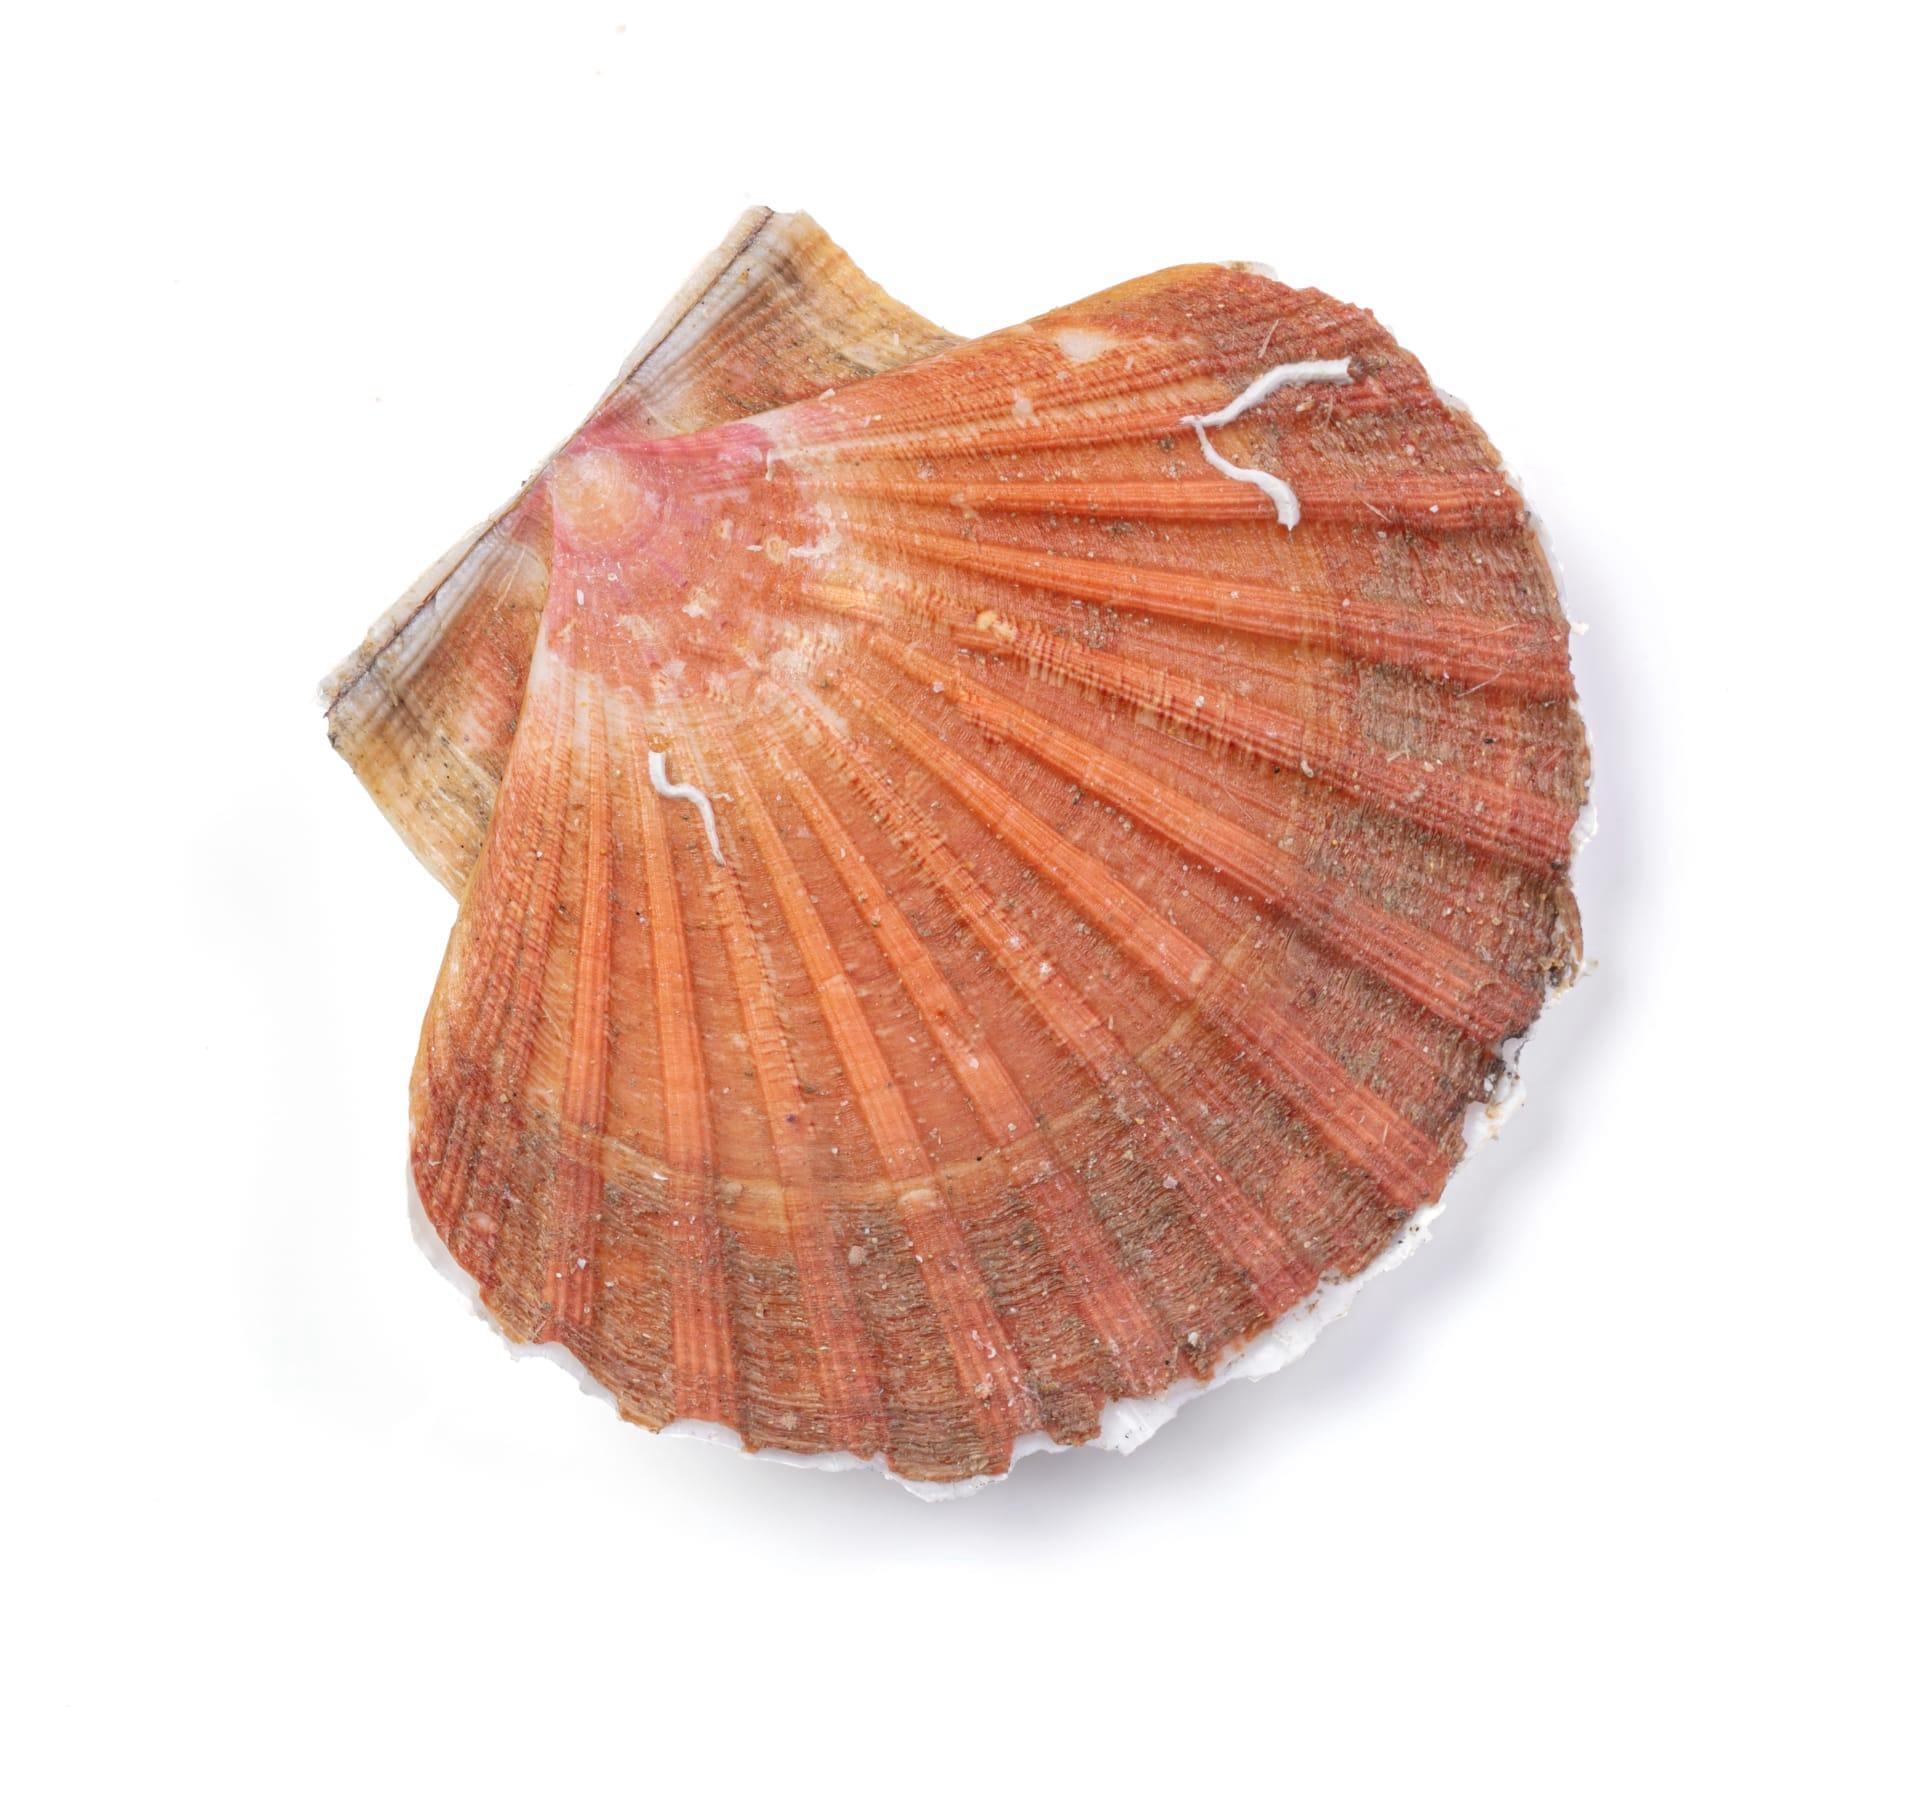 Scallop pictures